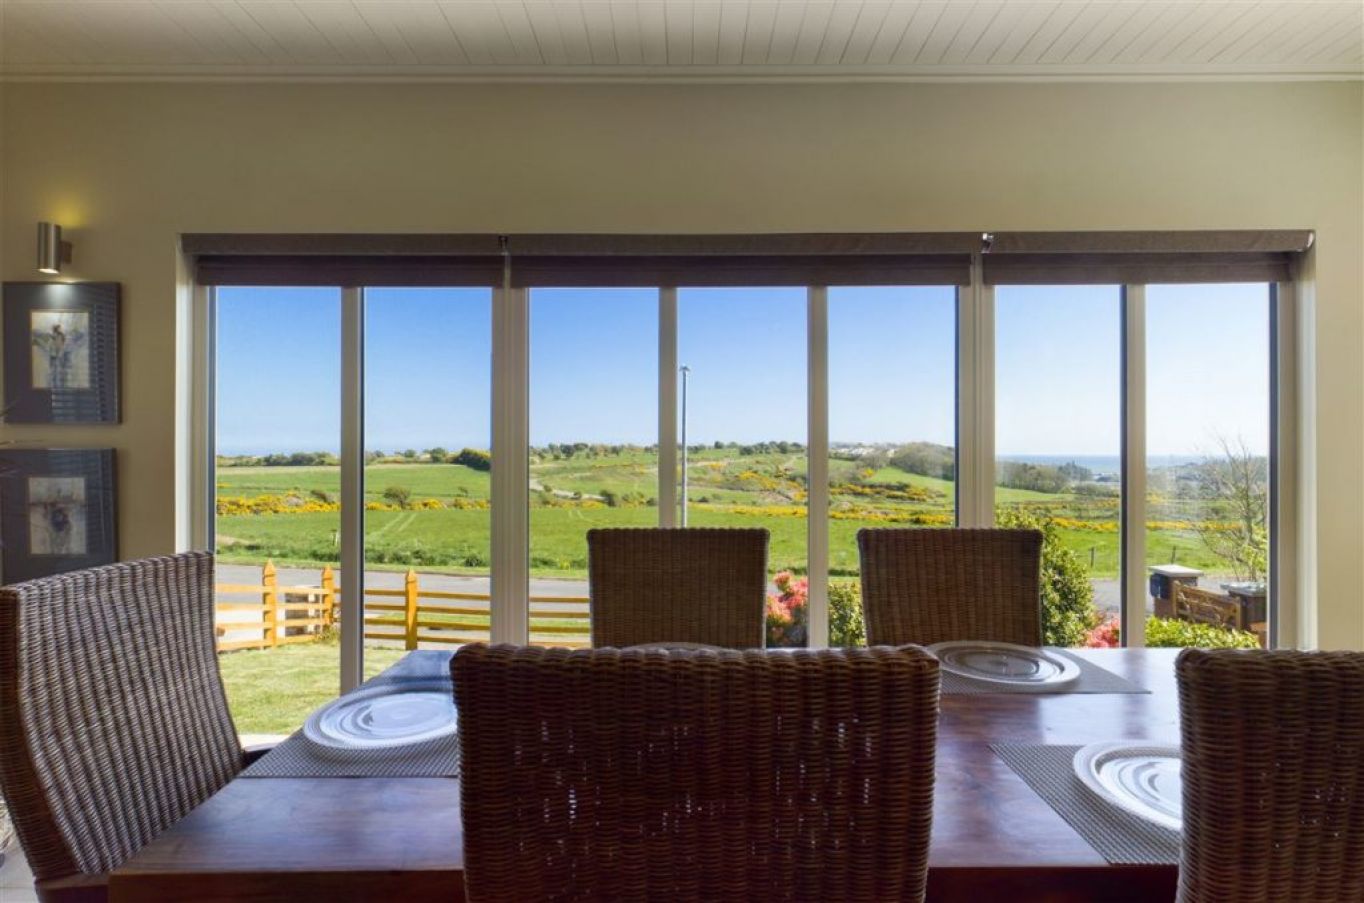 Large Windows Provide Views Of Dunmore East And Its Seascape. Photo: Courtesy Of Re/Max Property Specialists.